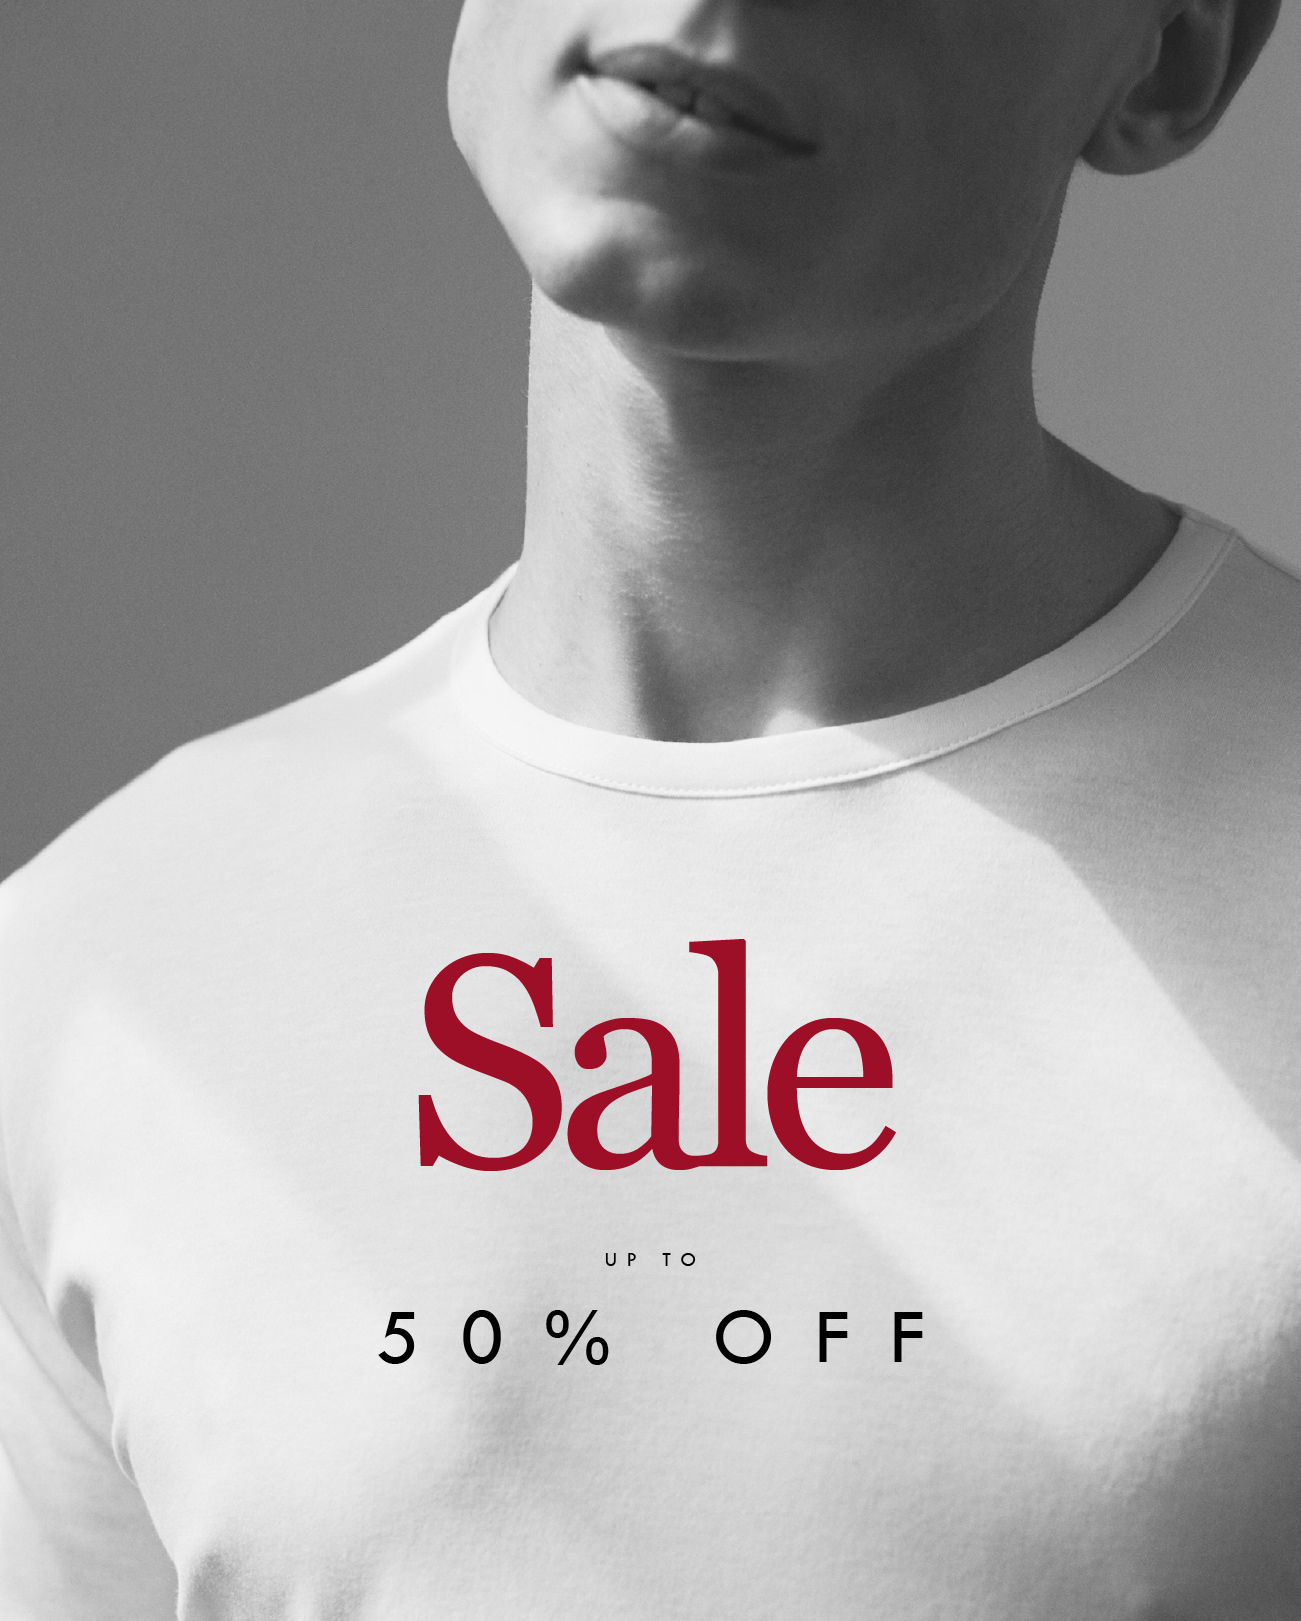 Sale
up to 50% off